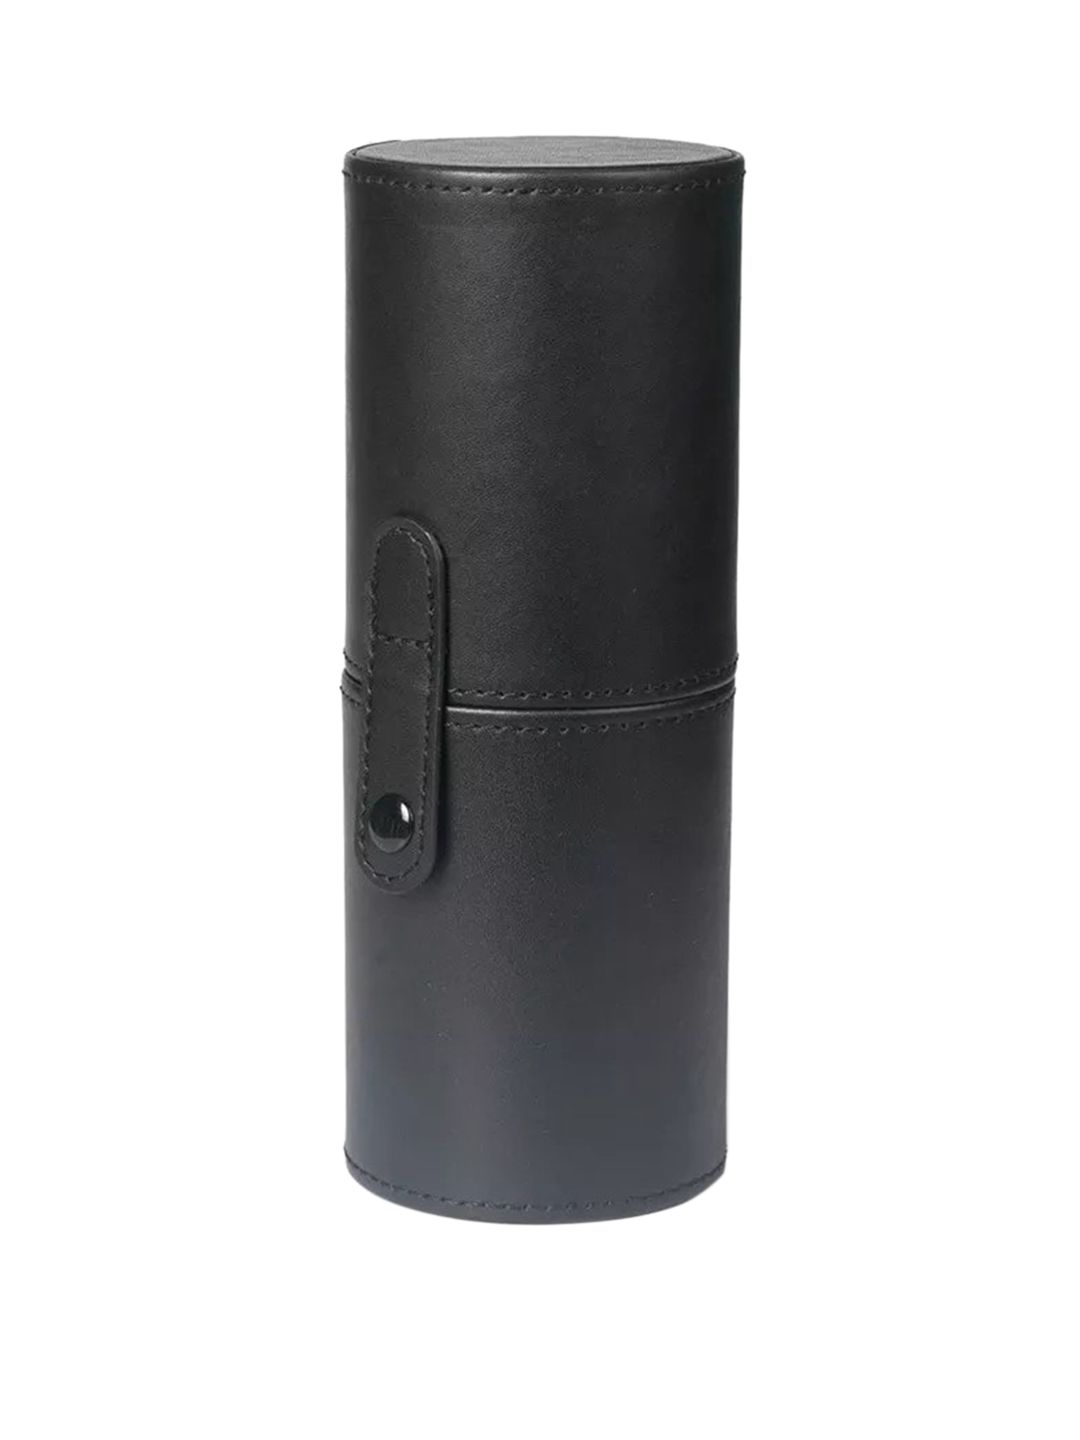 Boujee Beauty Cylindrical Travel Case Makeup-Brush Holder- H101 Price in India